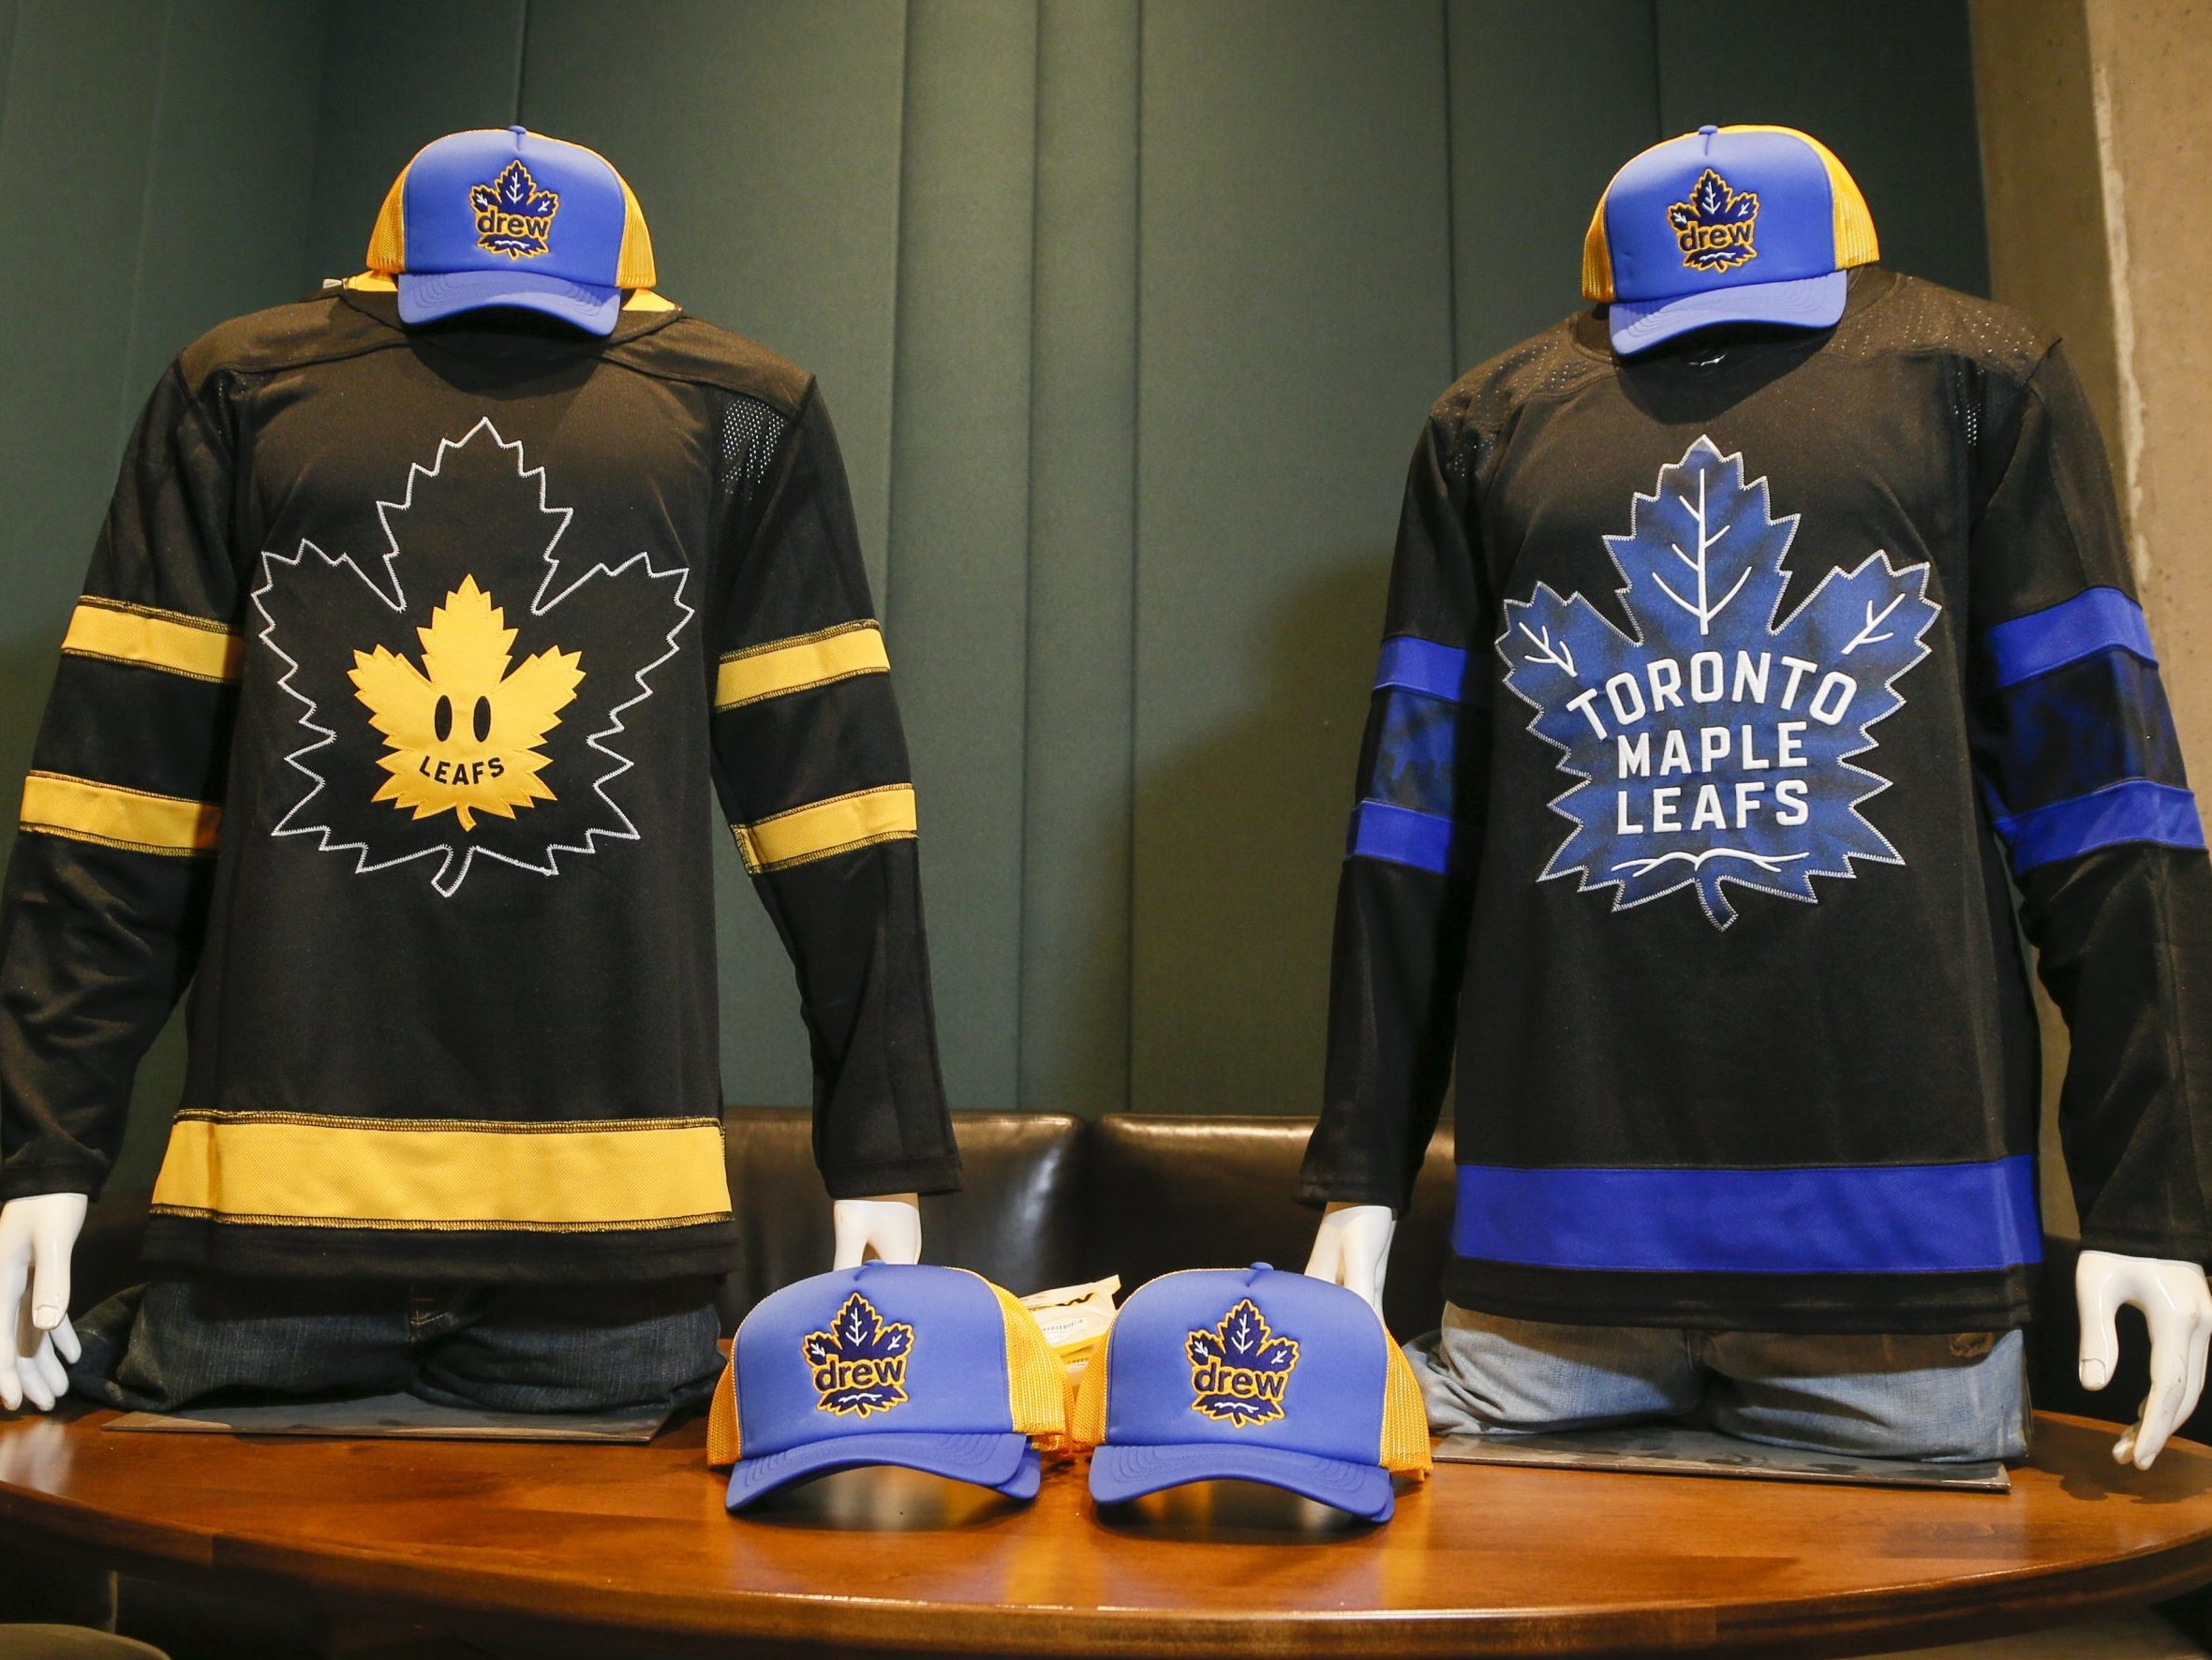 Bieber-Themed Leafs Jersey the NHL's Newest Best-Seller - The Hockey News